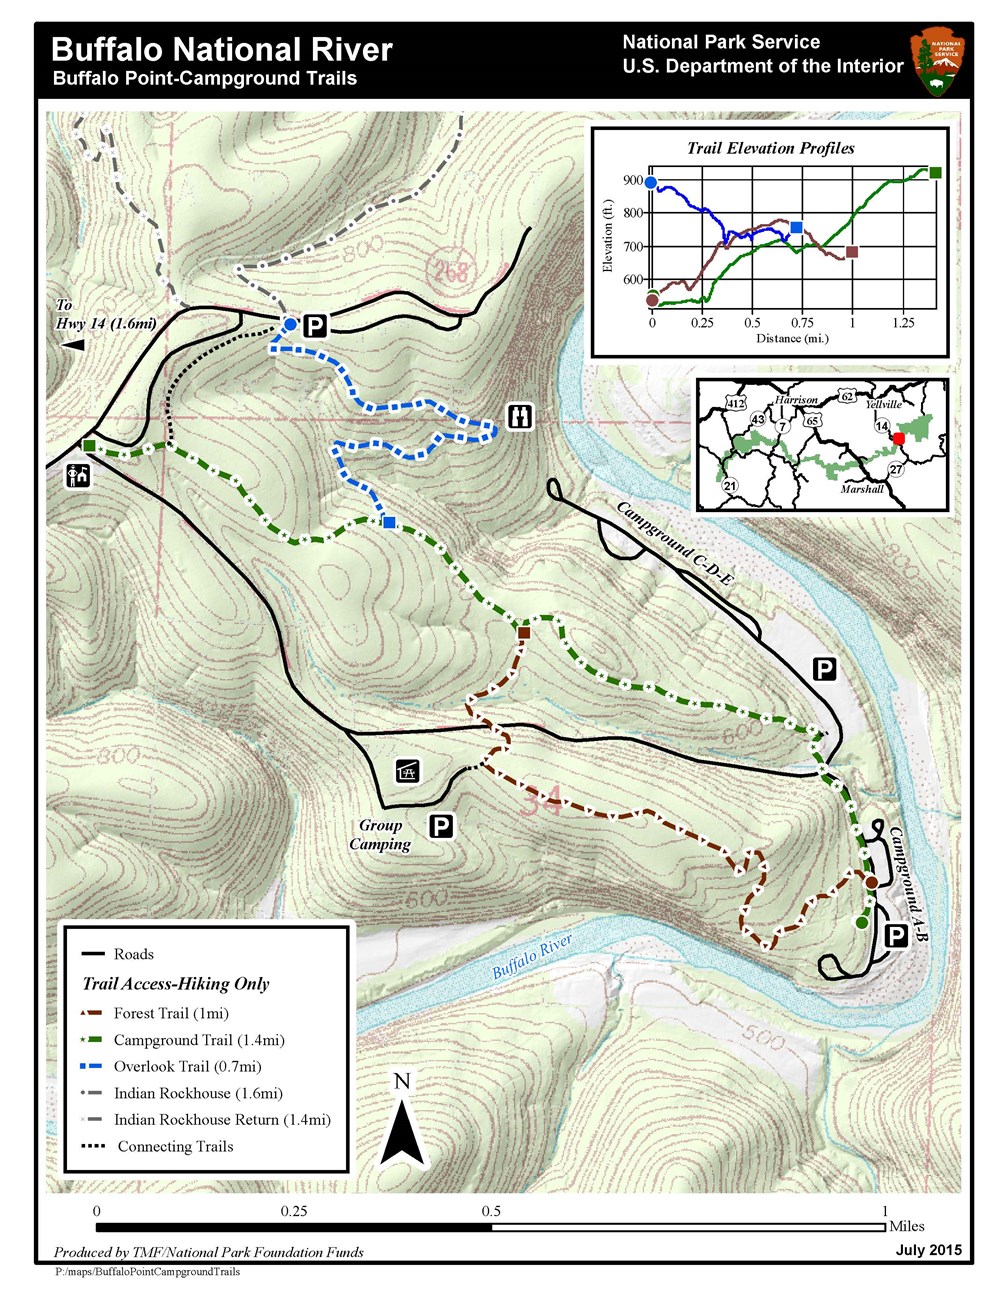 A topographic map with blue, green, and brown dashes marking the campground trails.